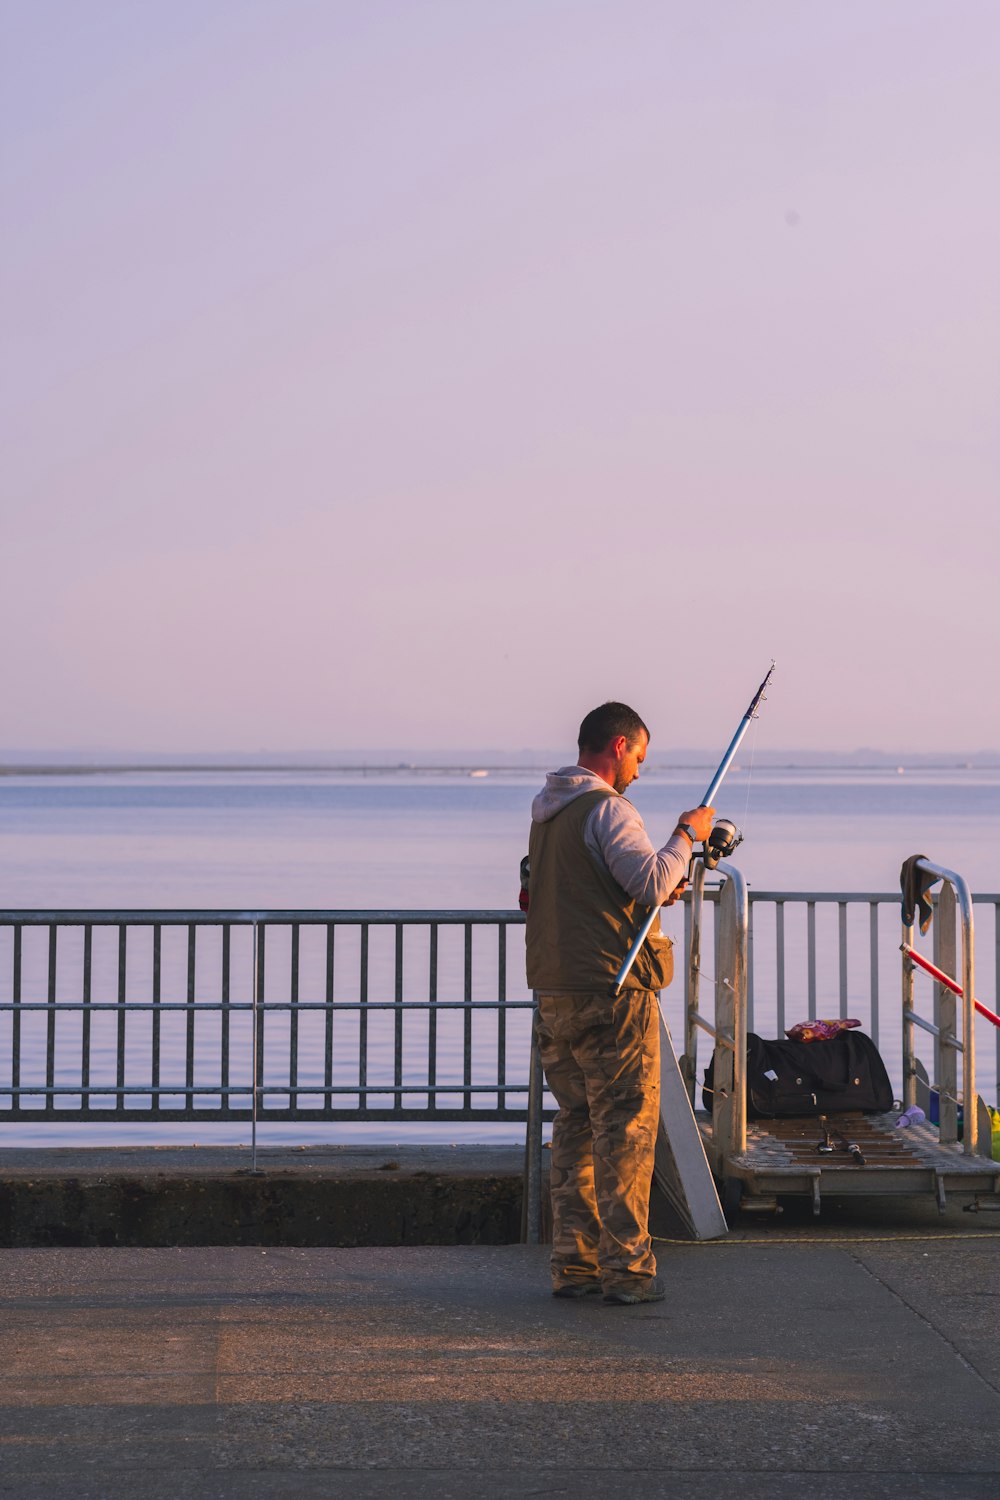 a man standing on a sidewalk holding a fishing pole